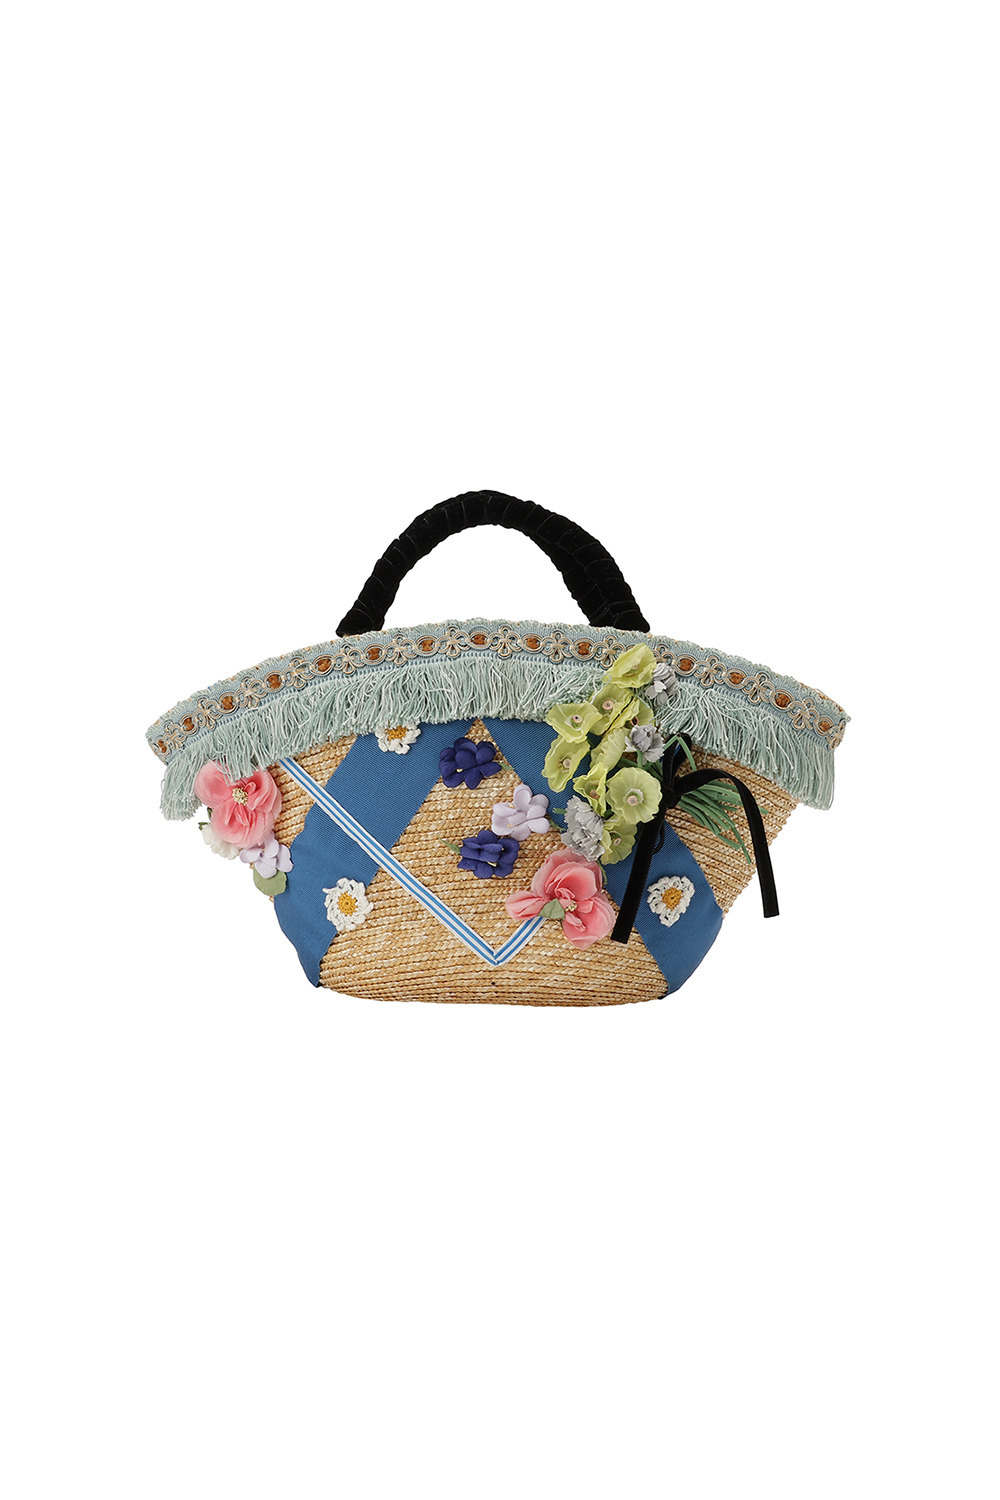 Flower couture basket バッグ 詳細画像 マルチ